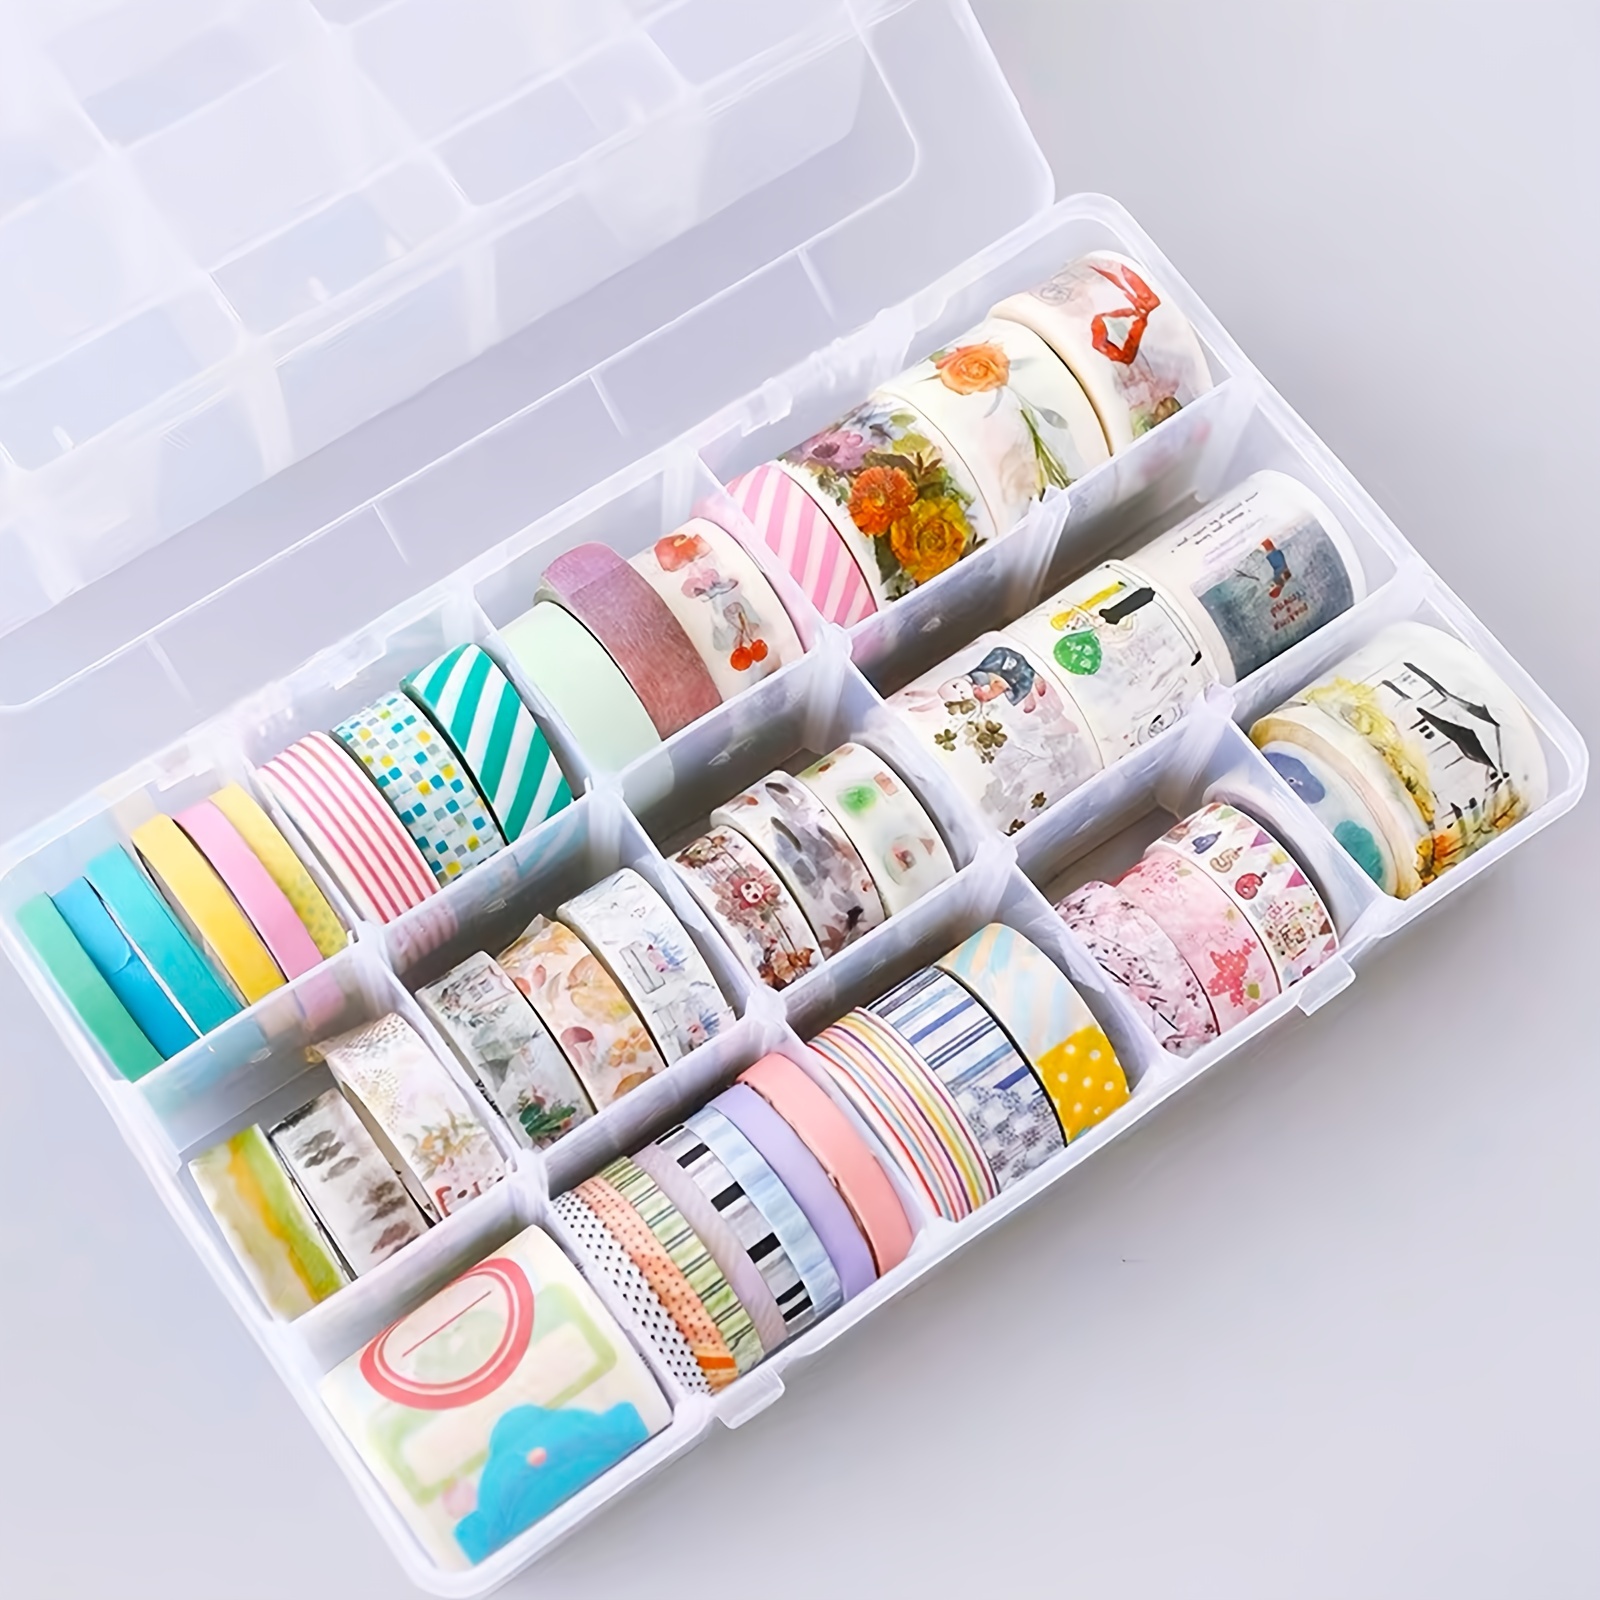 Large Grids Organizer Box for Washi Tape, 15 Compartments Storage Box,  Dividers for Ribbon, Crafts, Art Supply, Sewing by Fablise Craft